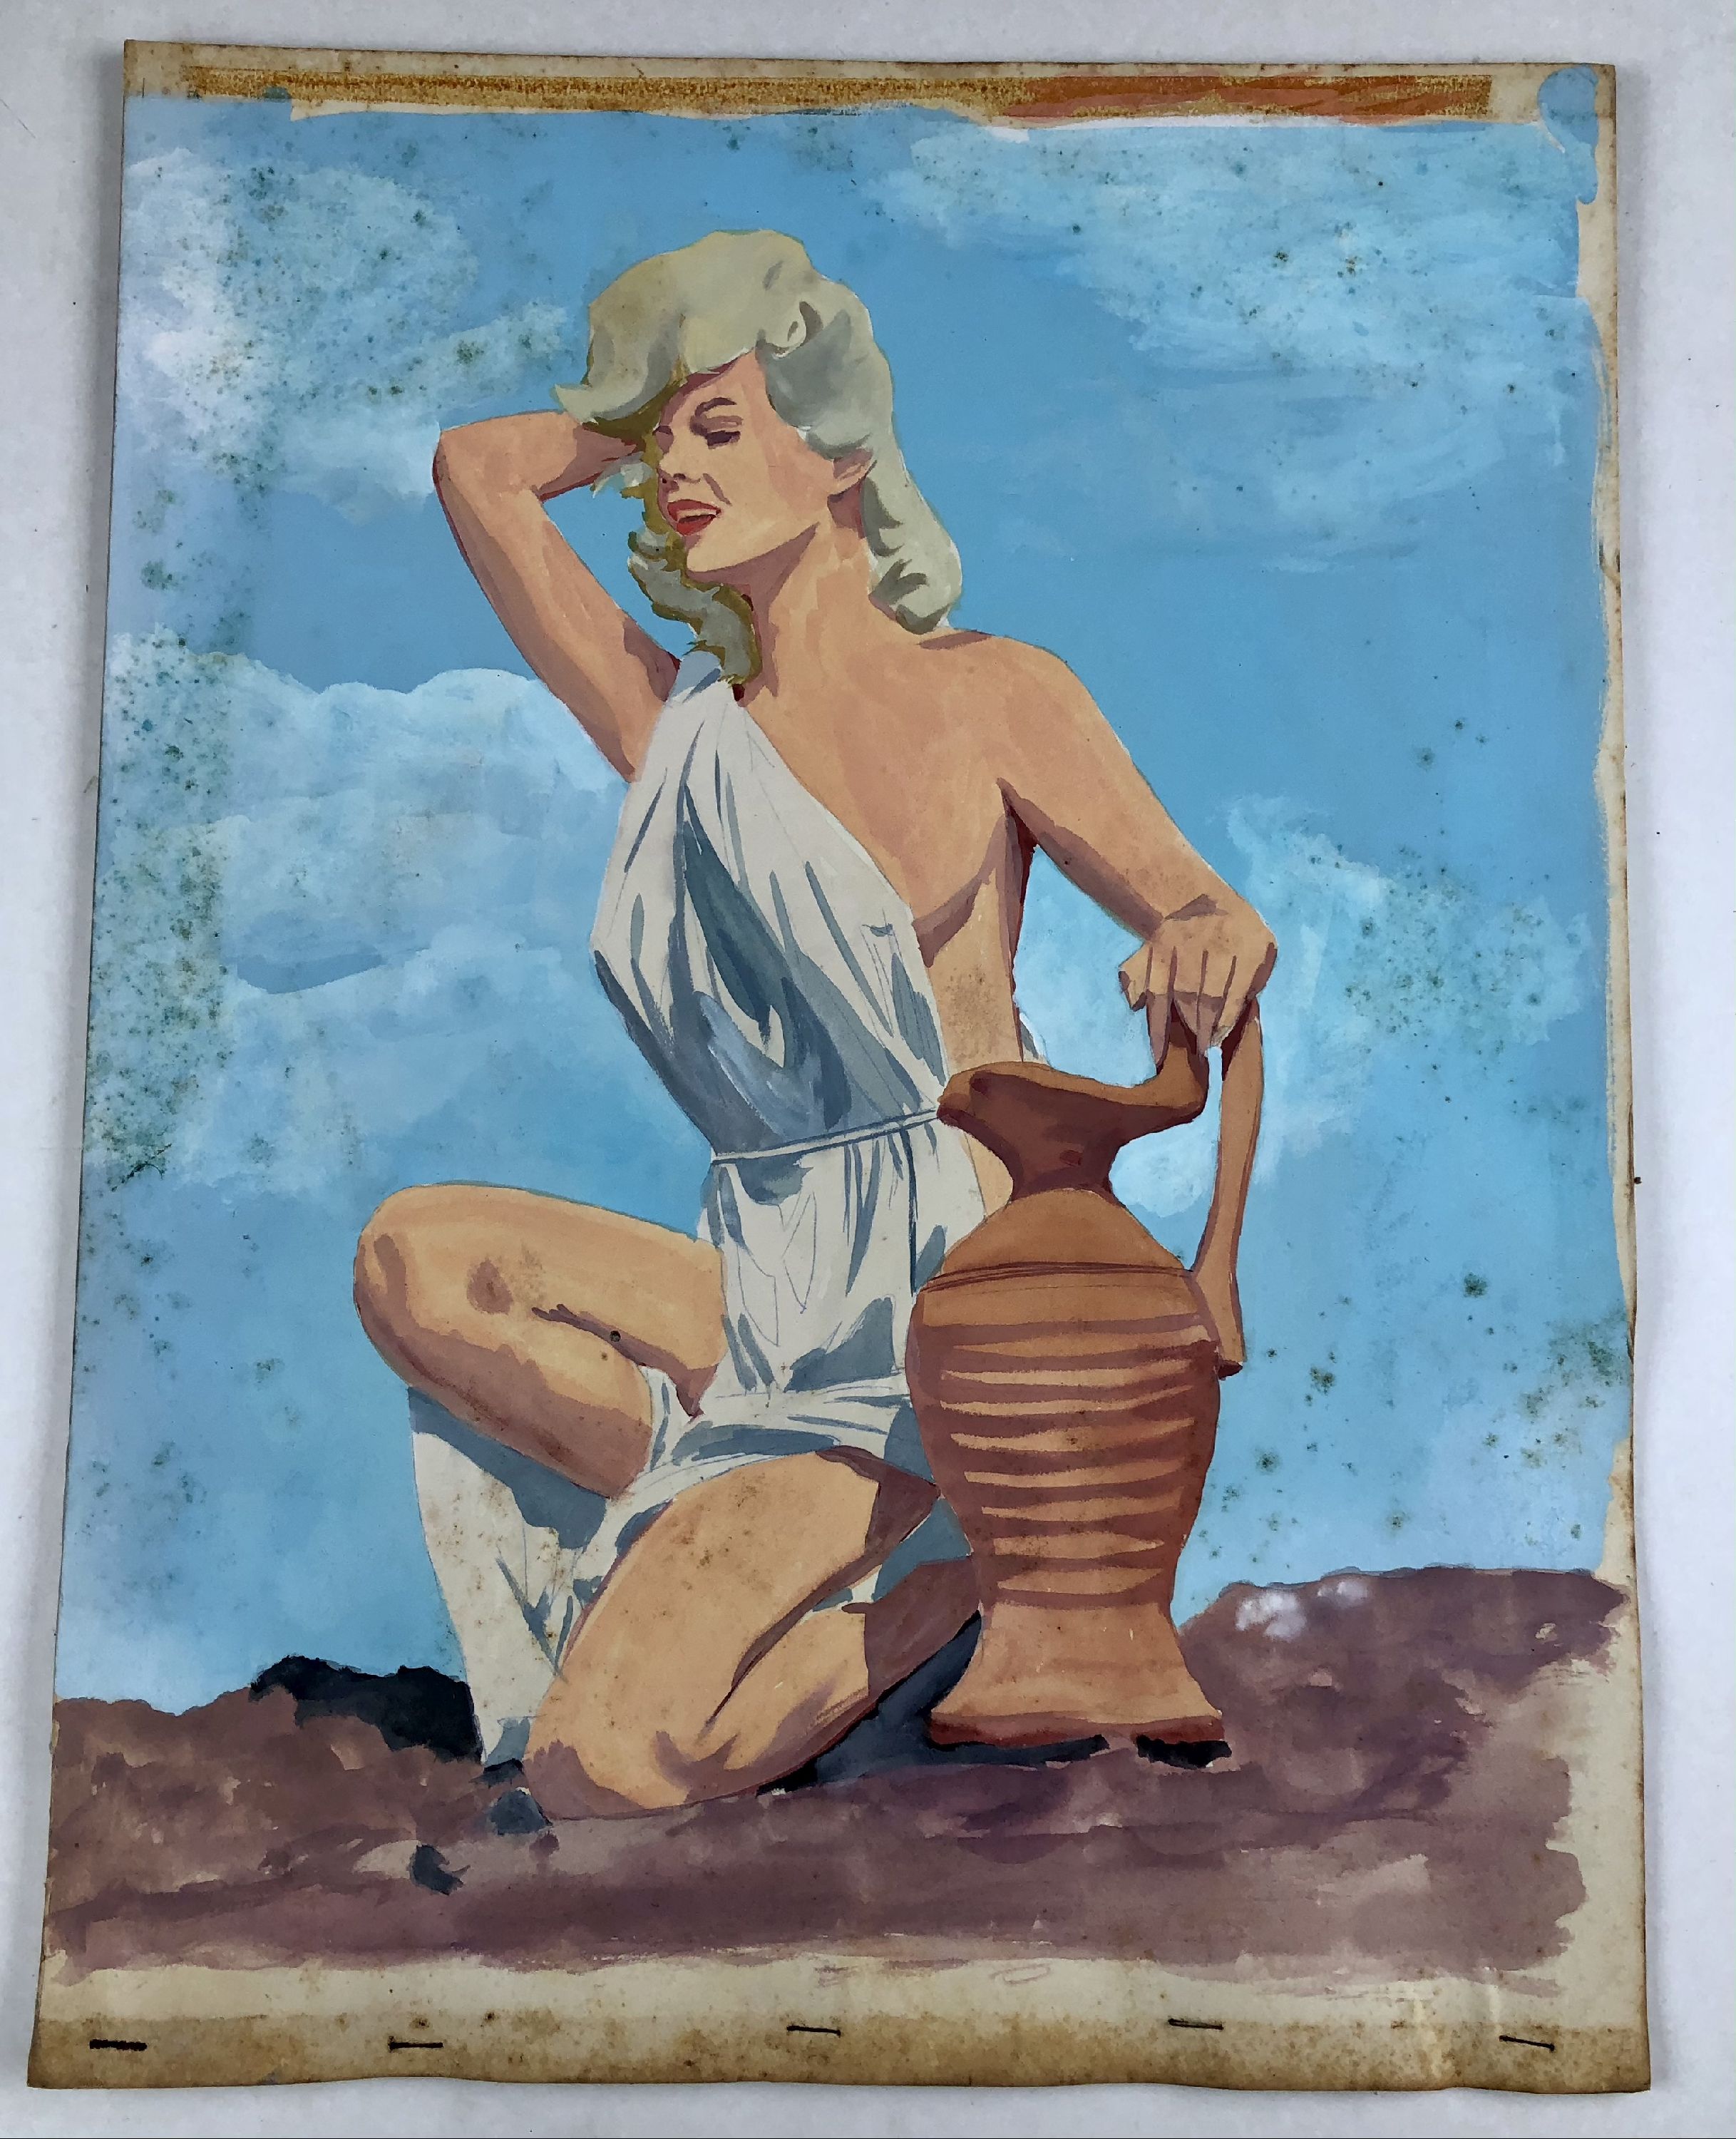 Bunny Yeager, in toga kneeling next to clay vase against blue sky (preliminary), foxing on surface